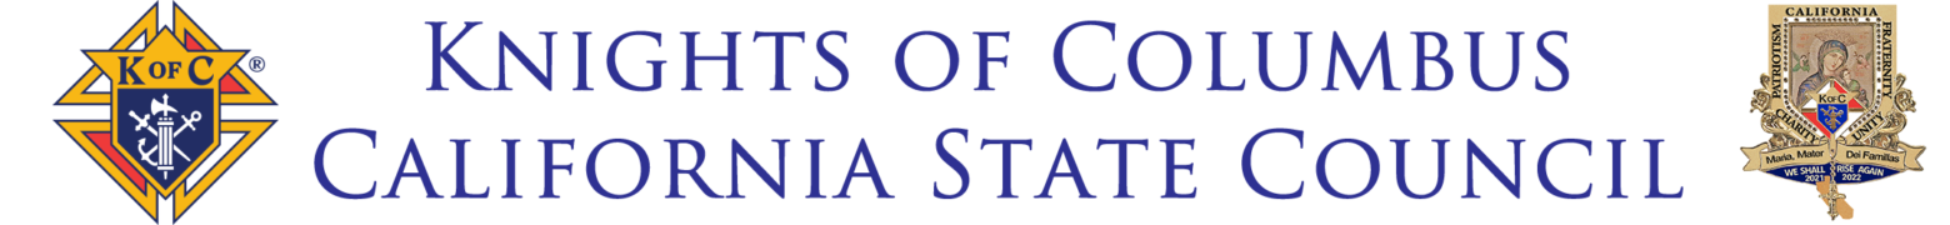 Knights of Columbus – California State Council #kofccalifornia @kofccalifornia